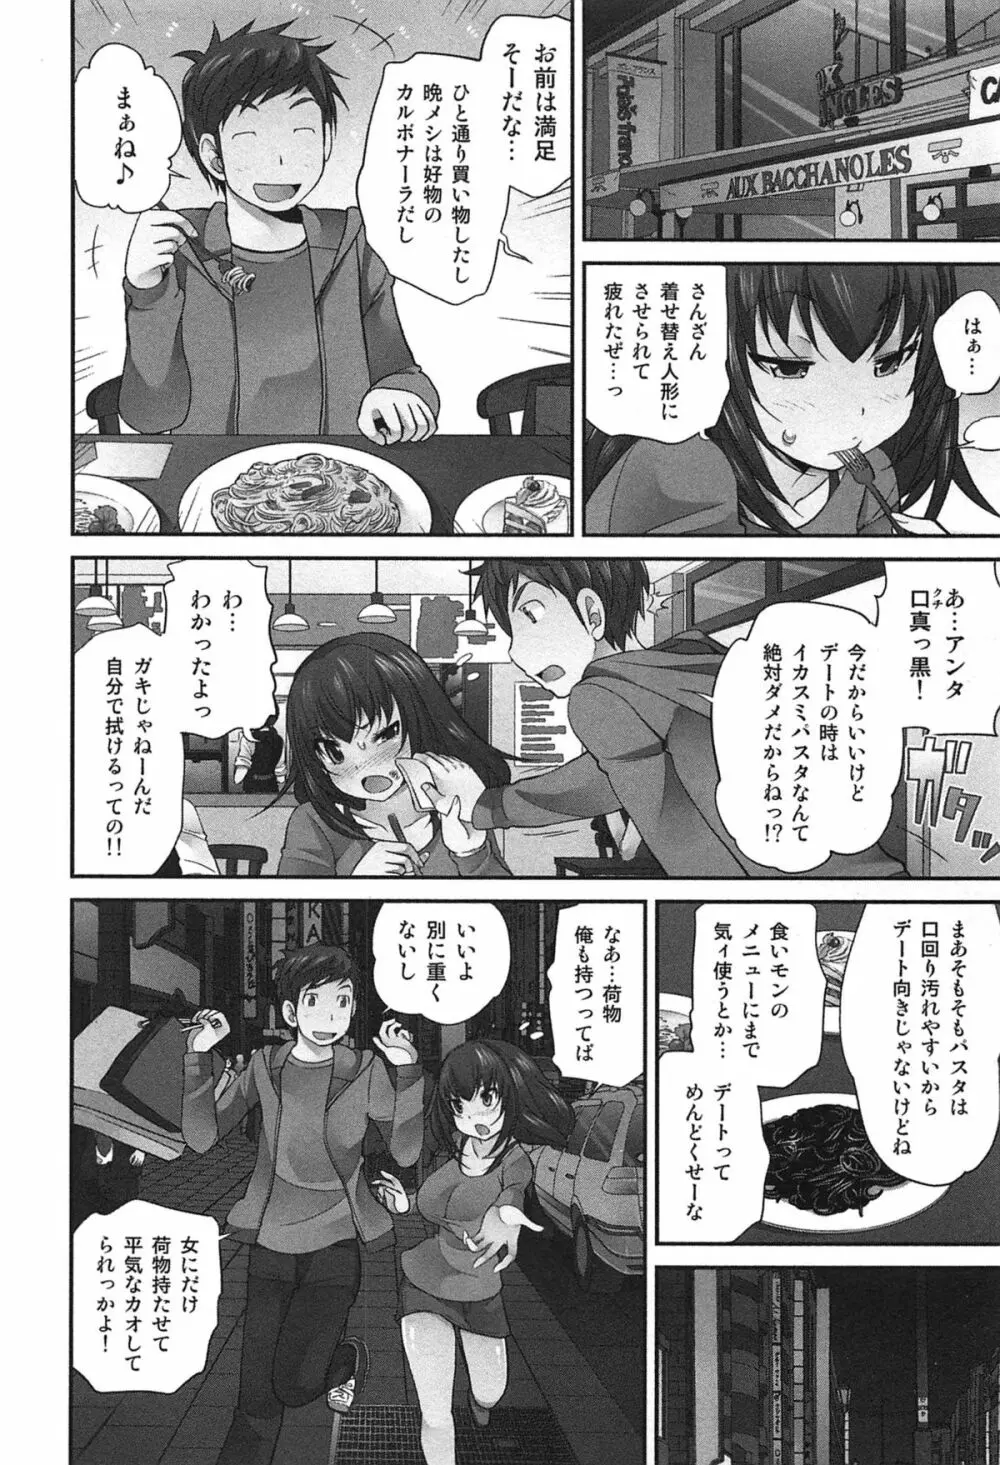 Exchange ～幼なじみと入れ替わり！？～ 131ページ